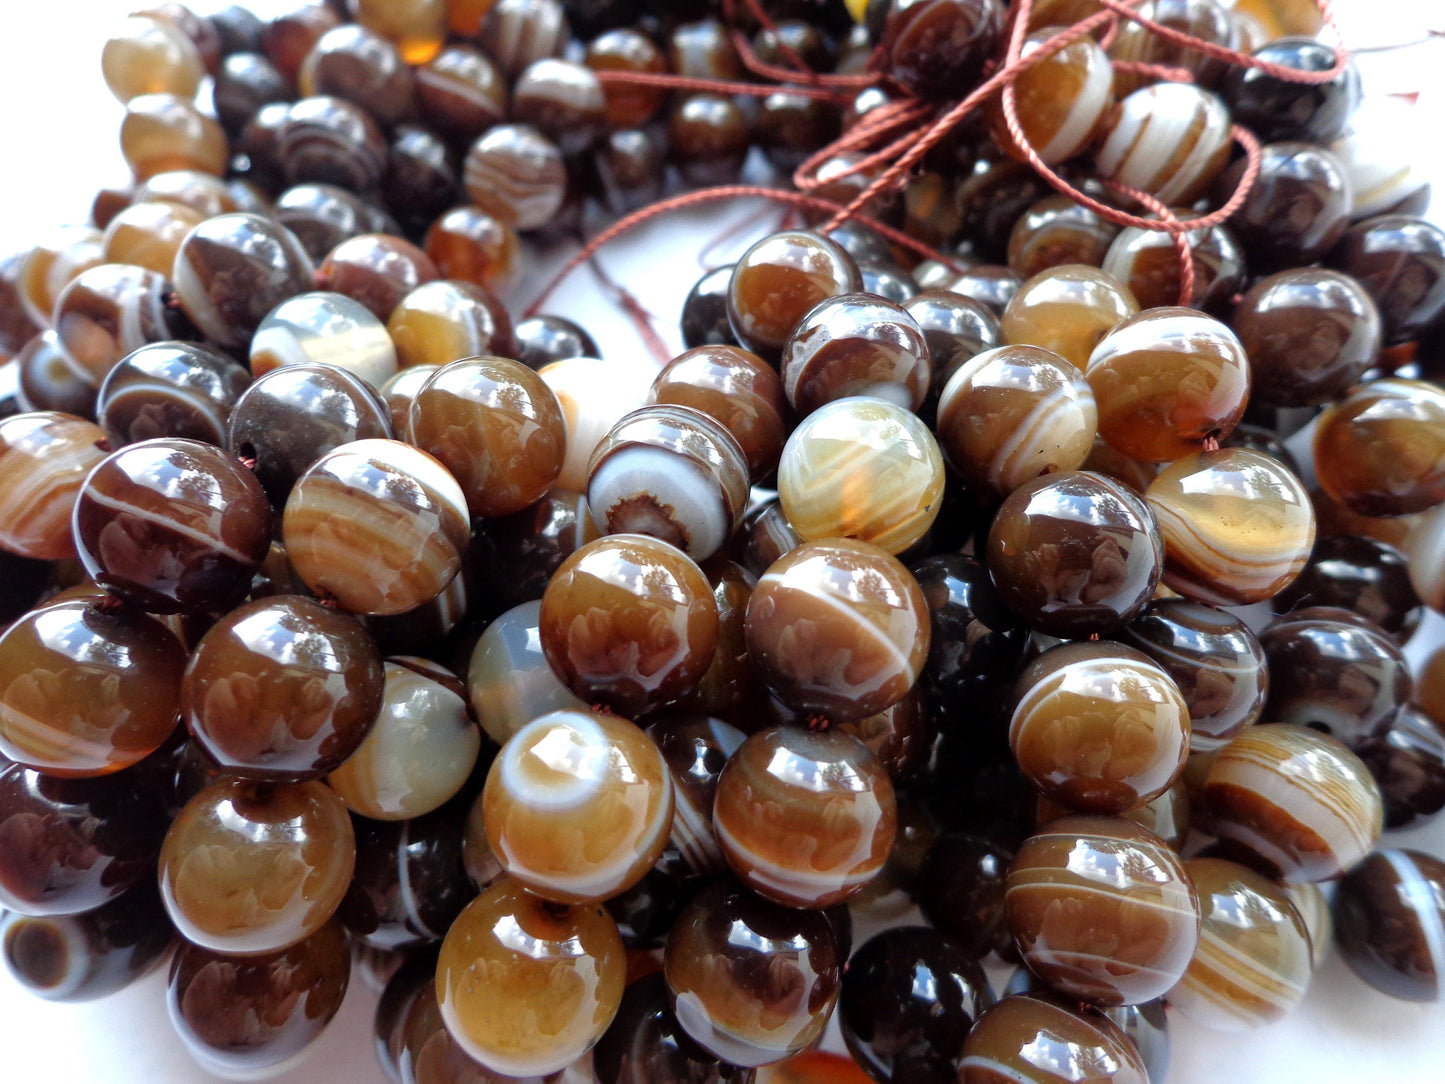 AAA Natural Agate Gemstone Beads, 6,8,10mm Smooth Round Shape Beads, Beautiful brown Beads, Great Quality Bead! Full length 15.5"